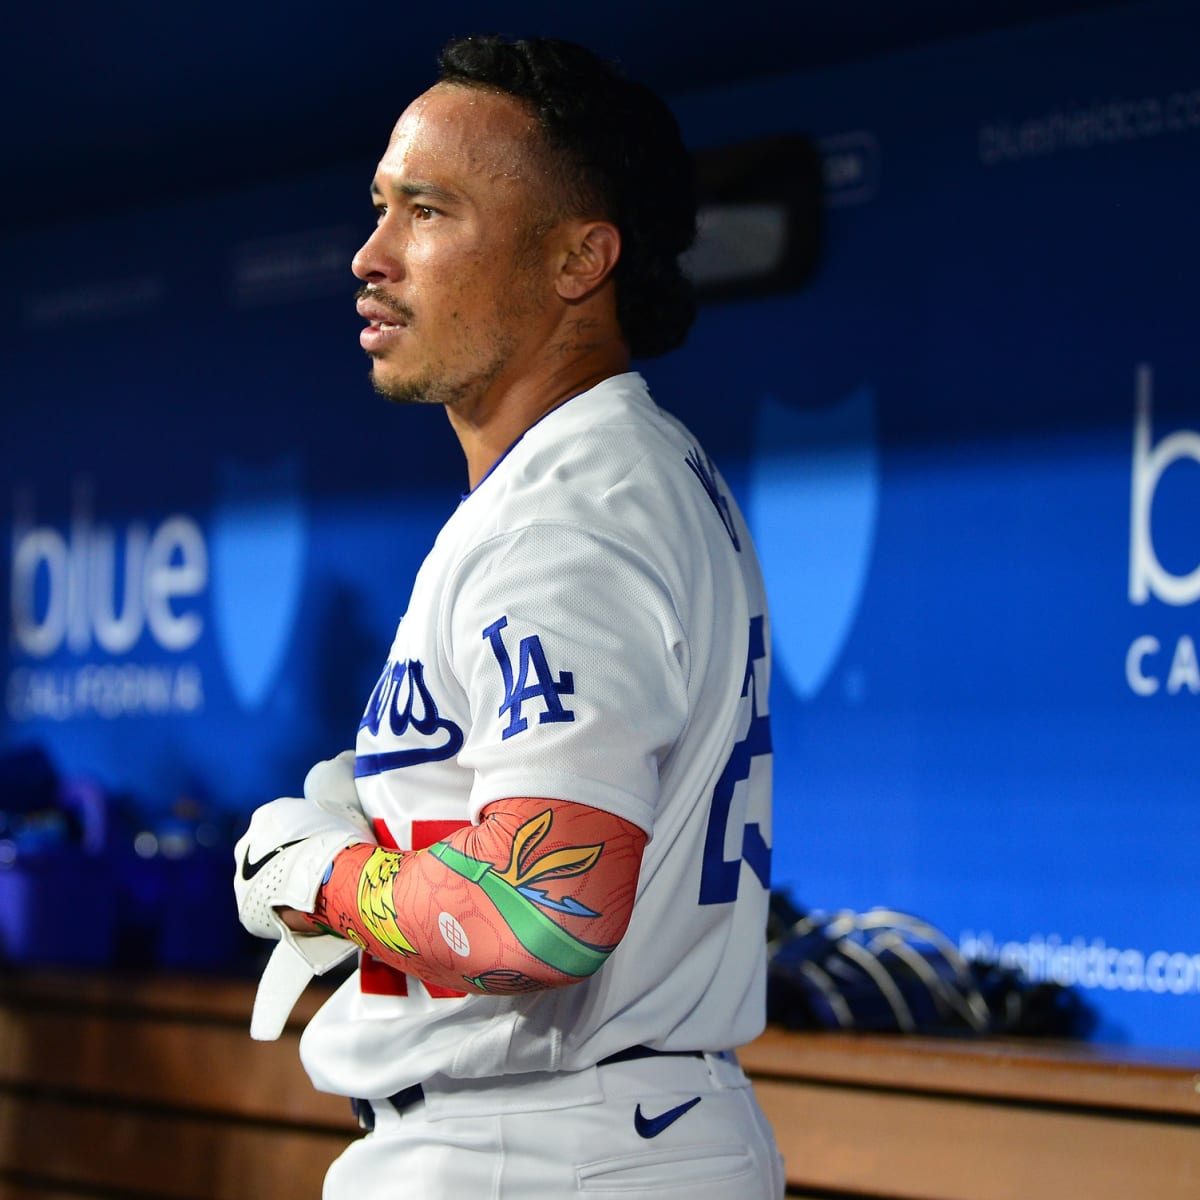 Dodgers News: Kolten Wong Ready and Willing to be a Team Player